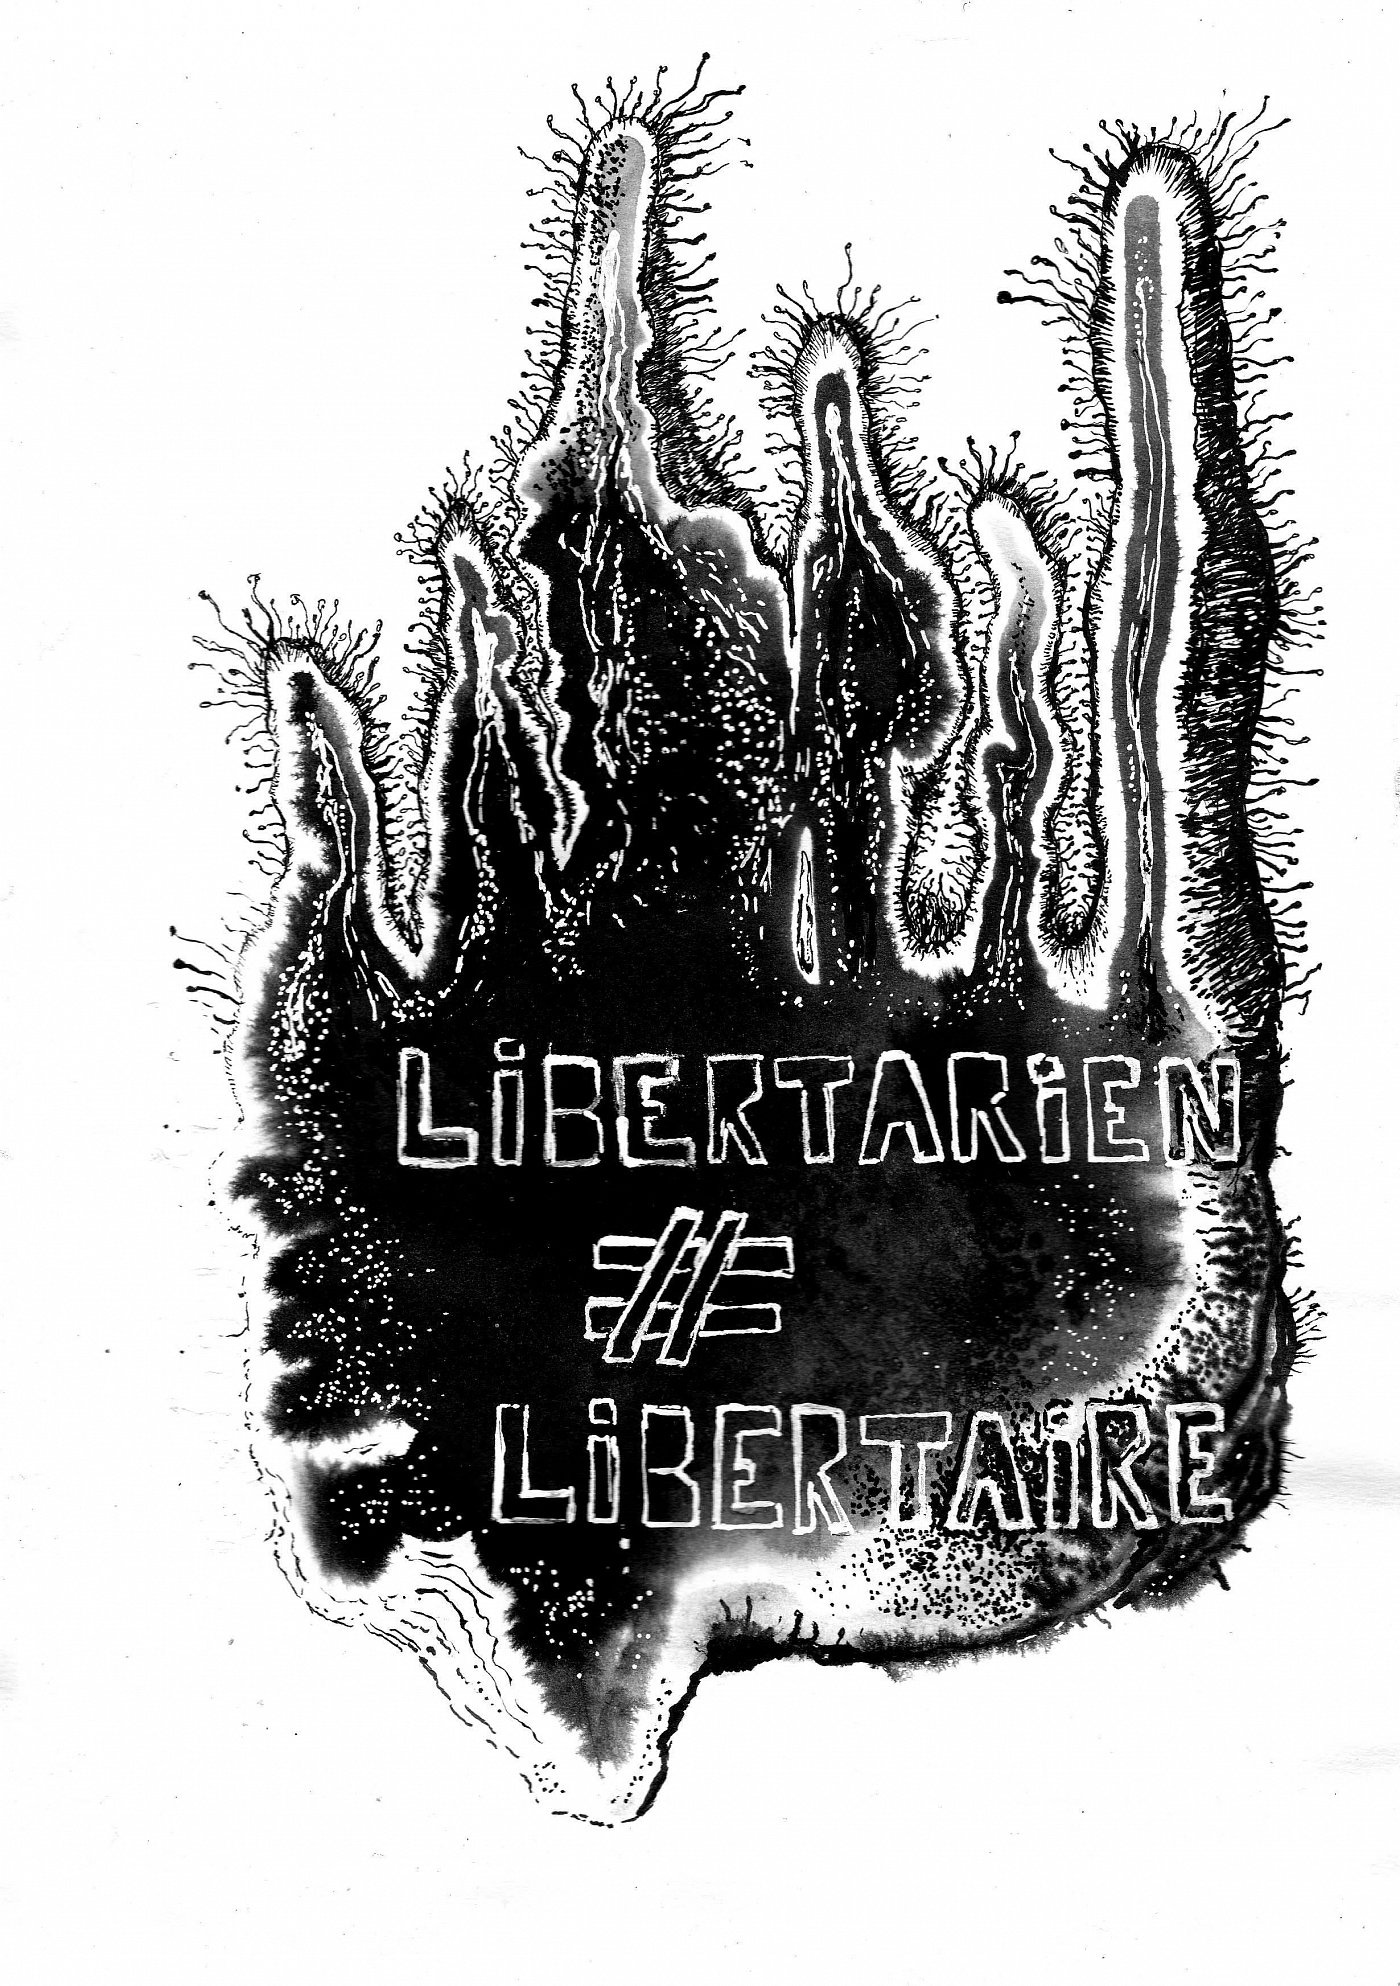 A drawing shows a virus-like creature, the text read libertarien ≠ libertaire